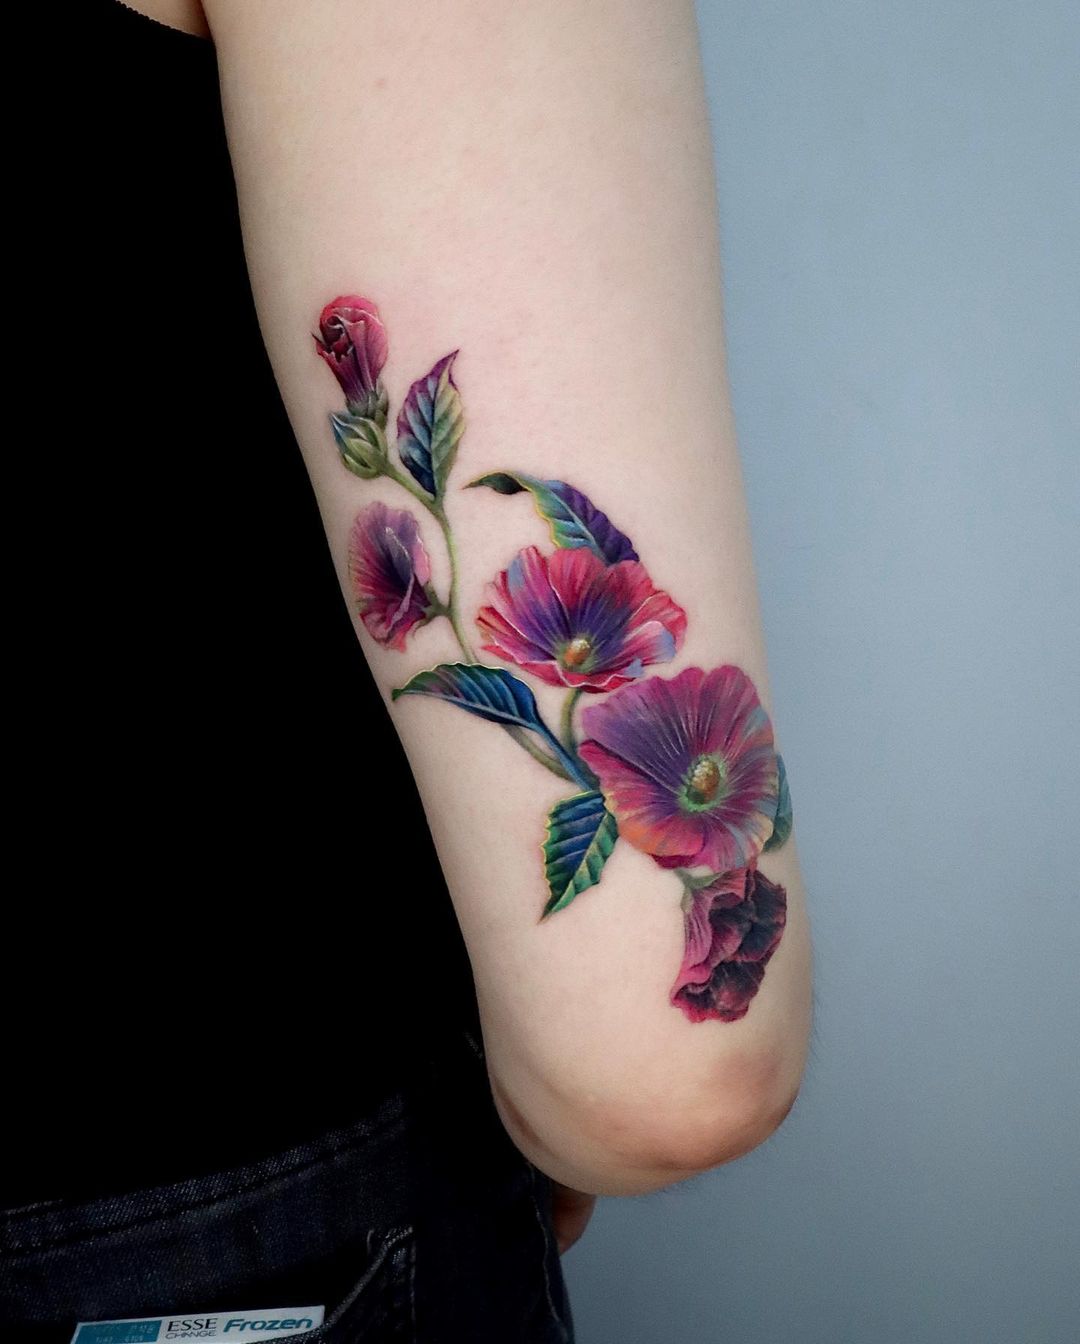 64 Inspiring Flower Tattoos to Come Up with a Great Idea - Hairstylery